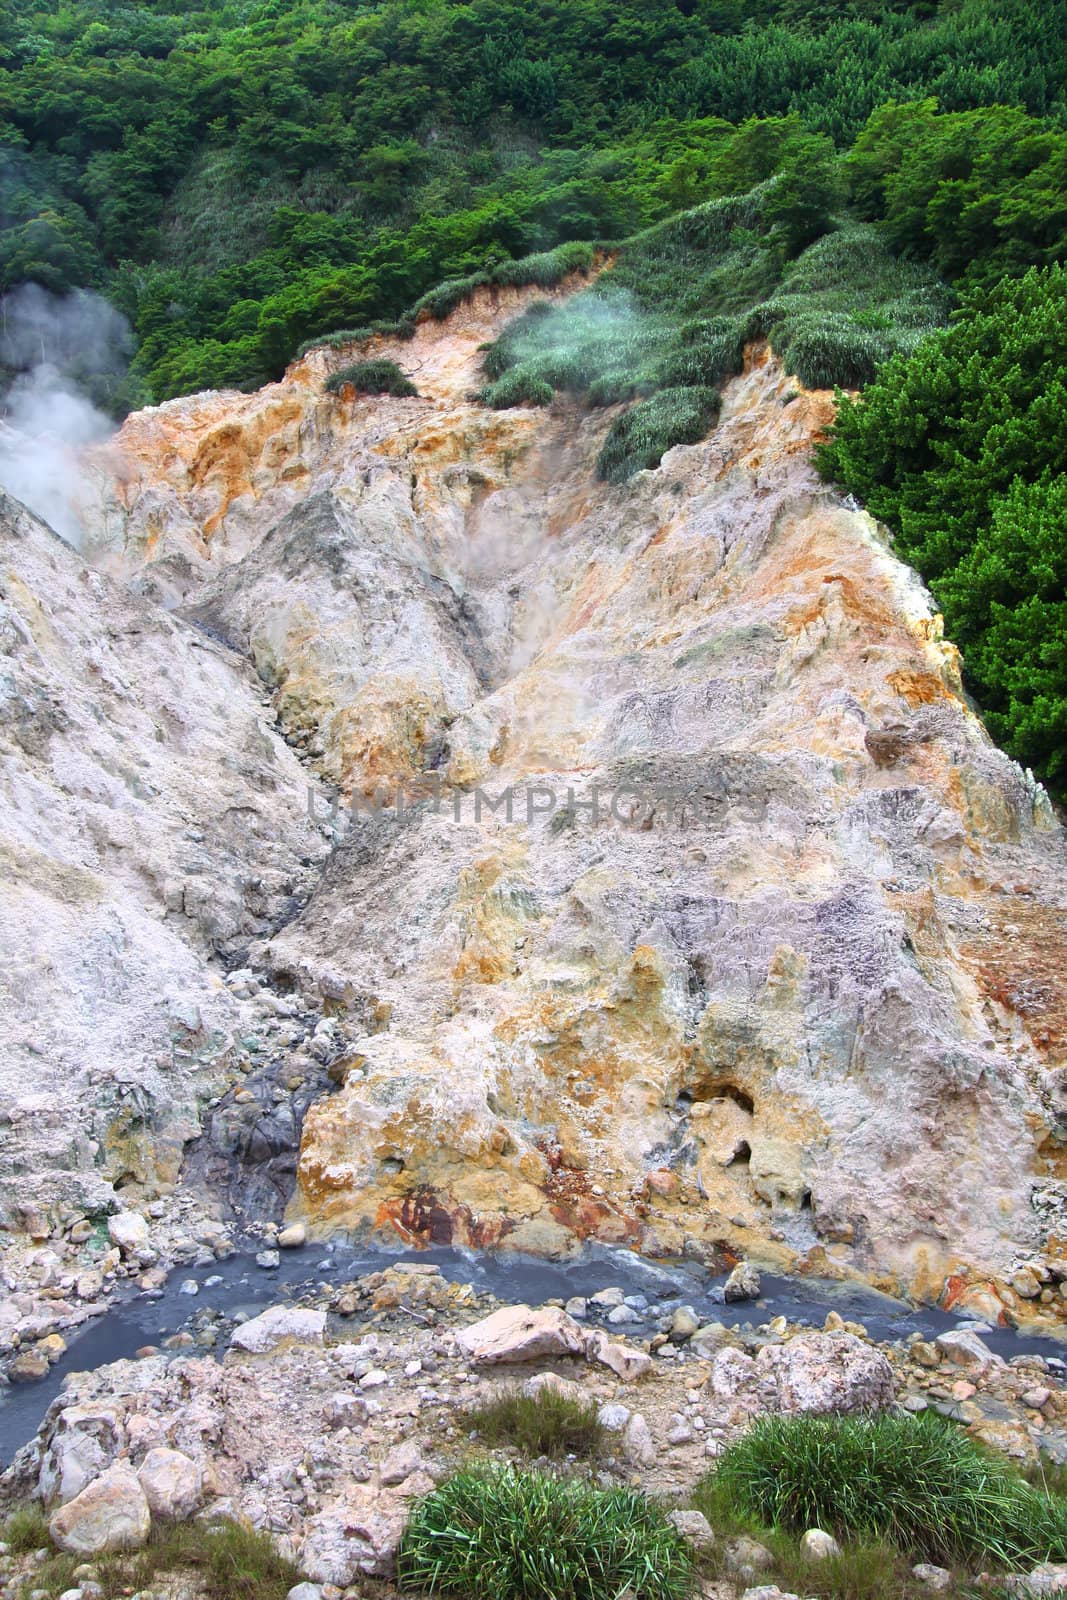 View of the Sulphur Springs Drive-in Volcano near Soufriere Saint Lucia.